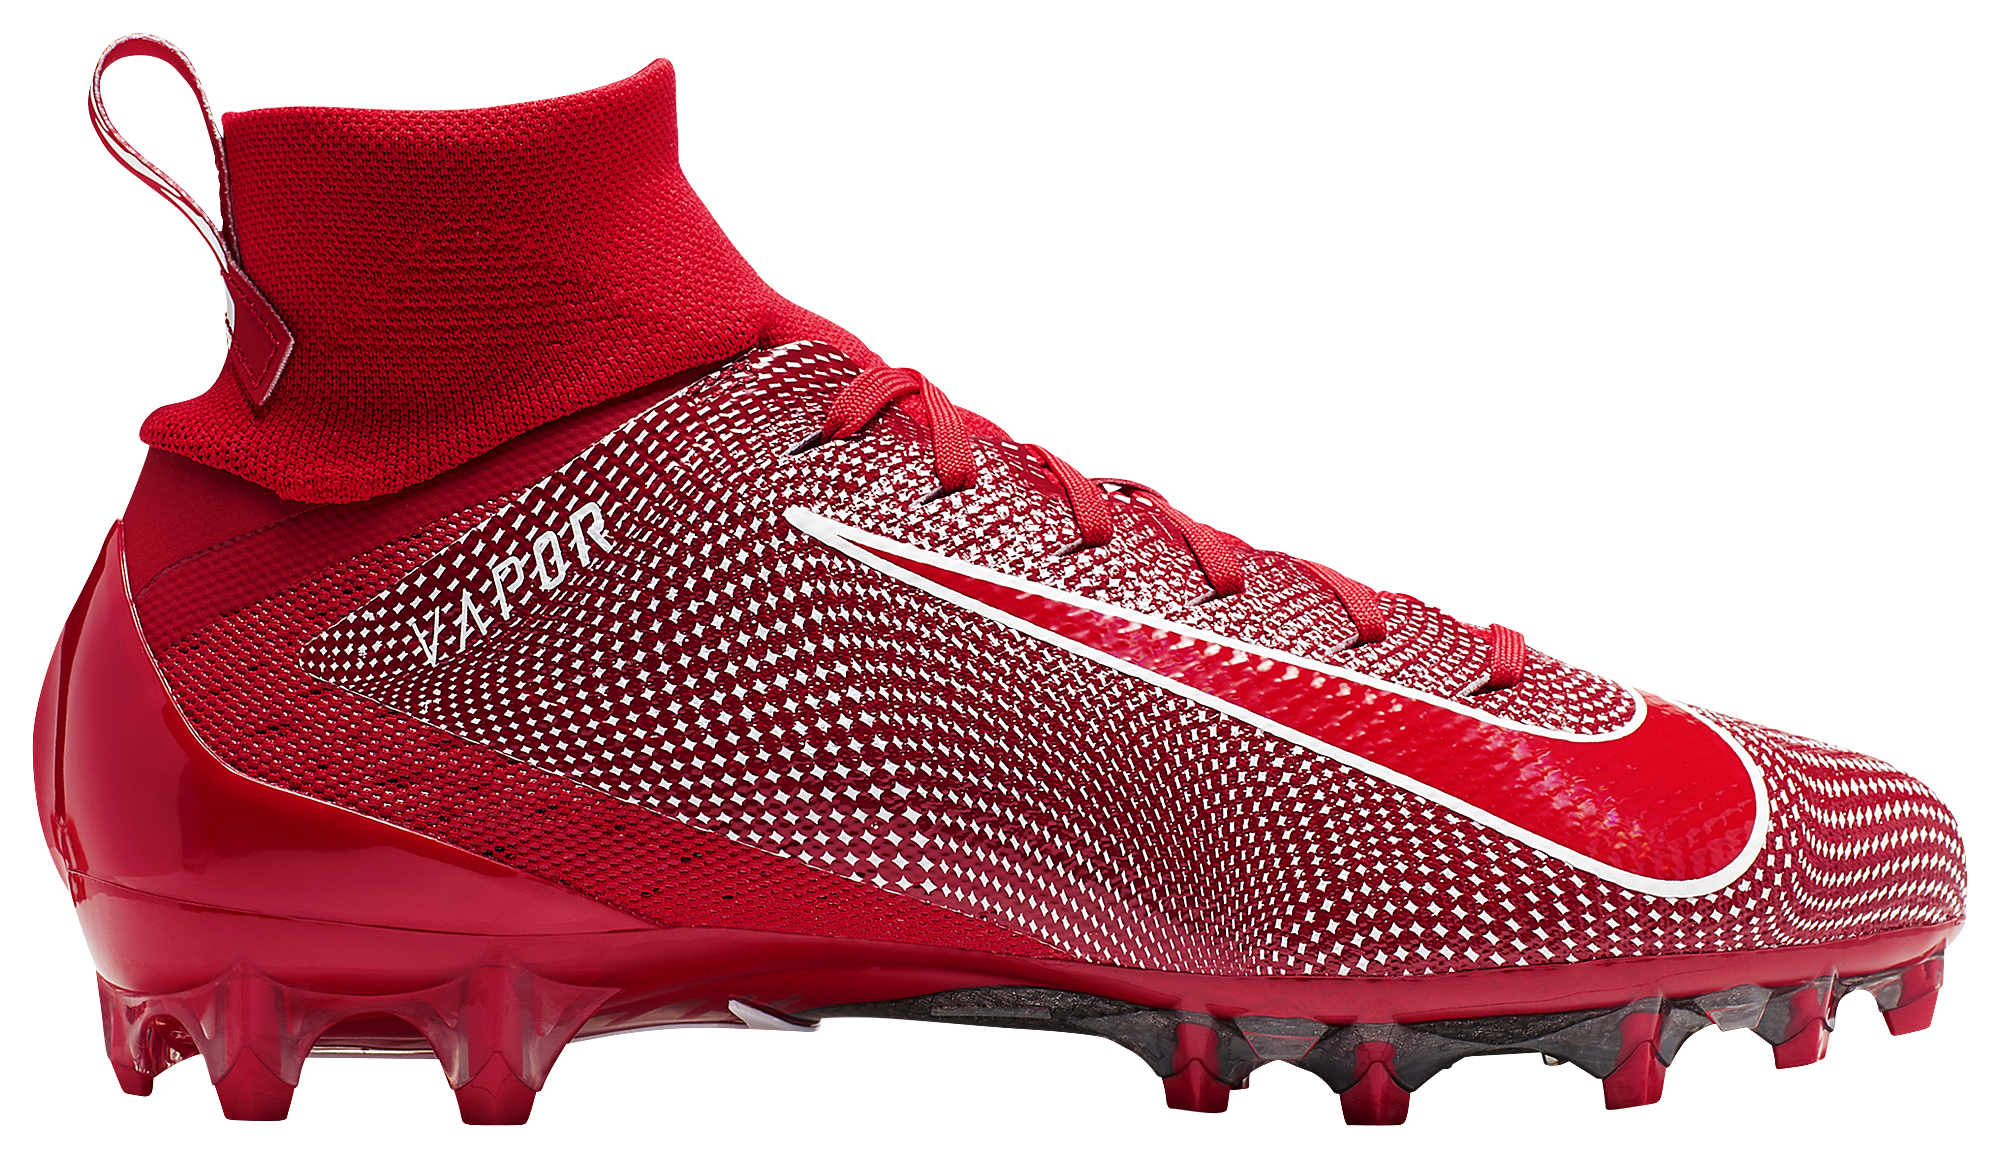 red cleats football nike